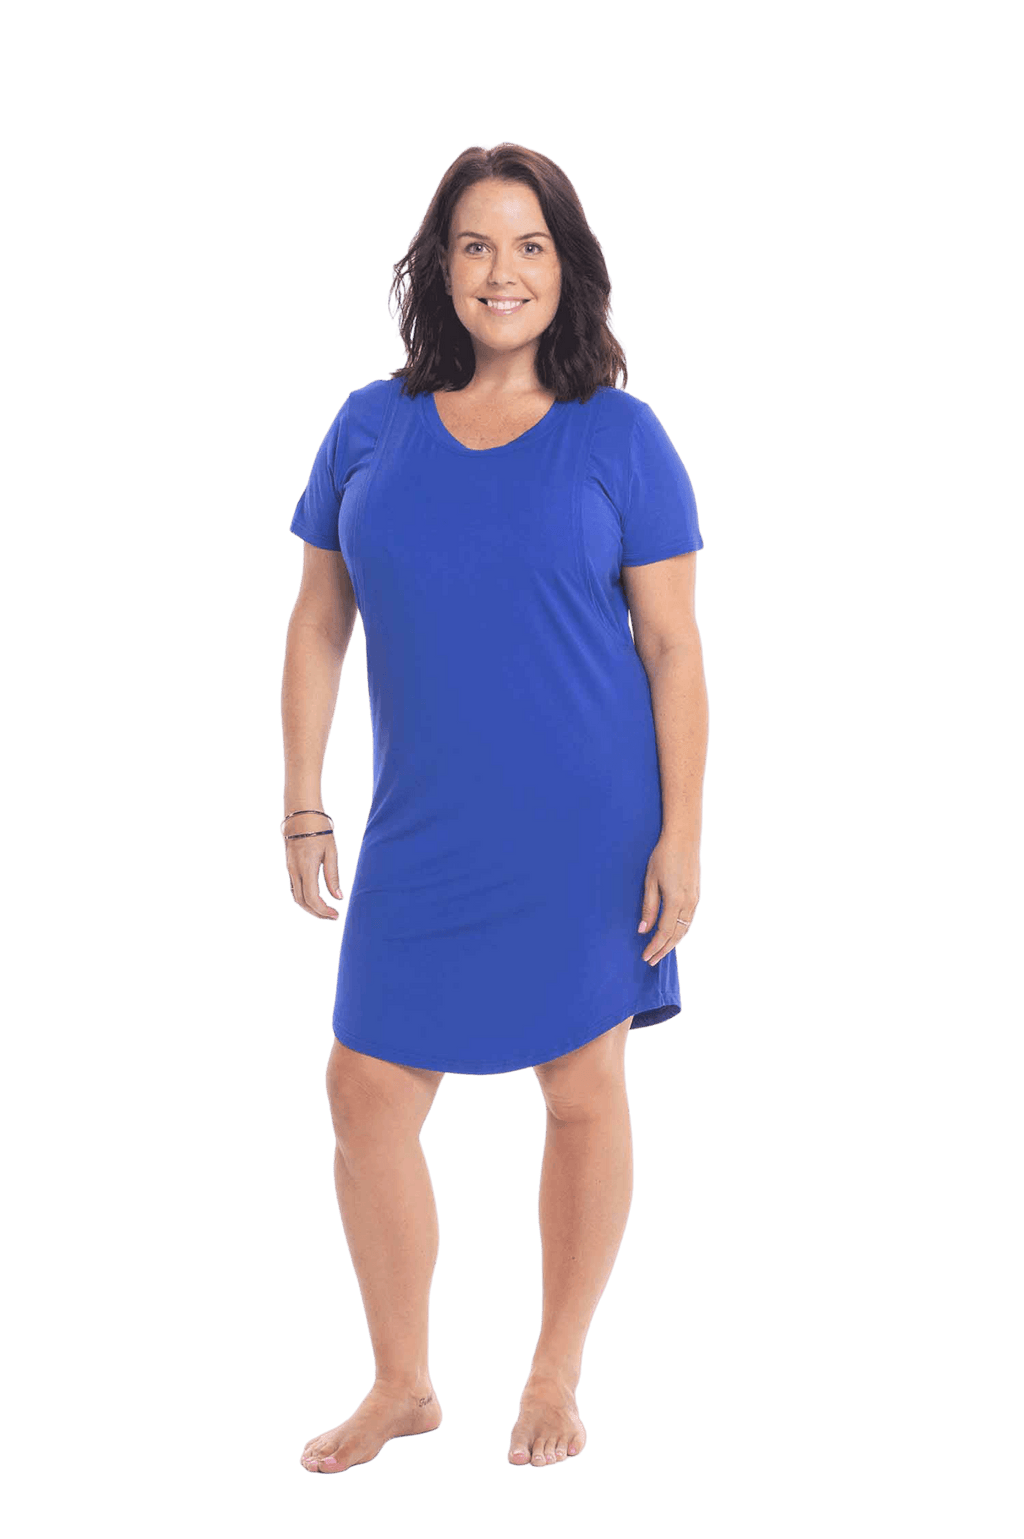 Brunette model facing camera wearing royal blue mid thigh length nightie, featuring rounded neckline, scooped hemline with short sleeves. Penny available in sizes 6-18